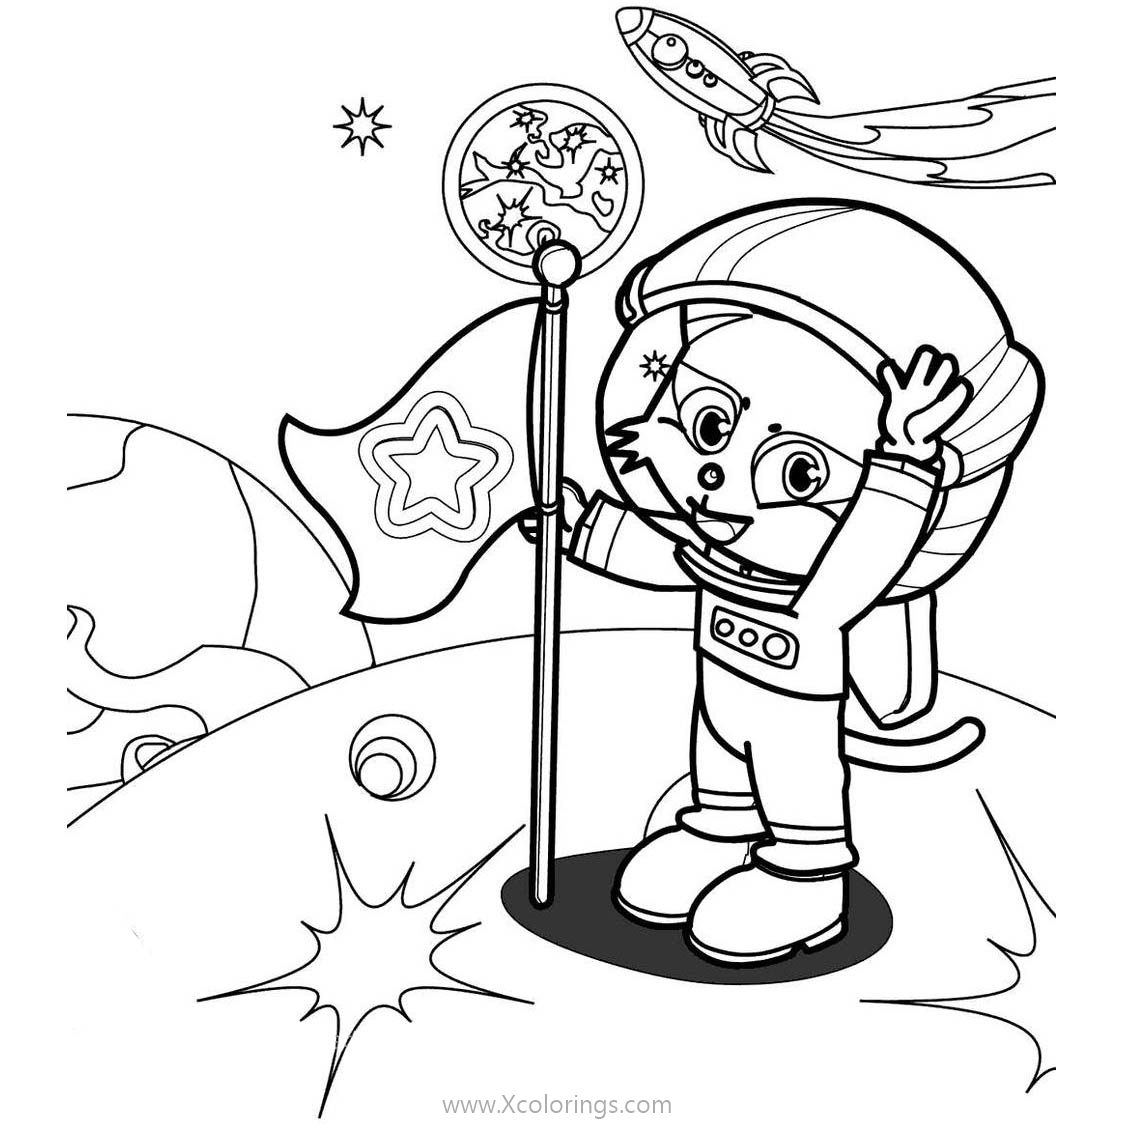 Free Animal Astronaut Coloring Pages printable